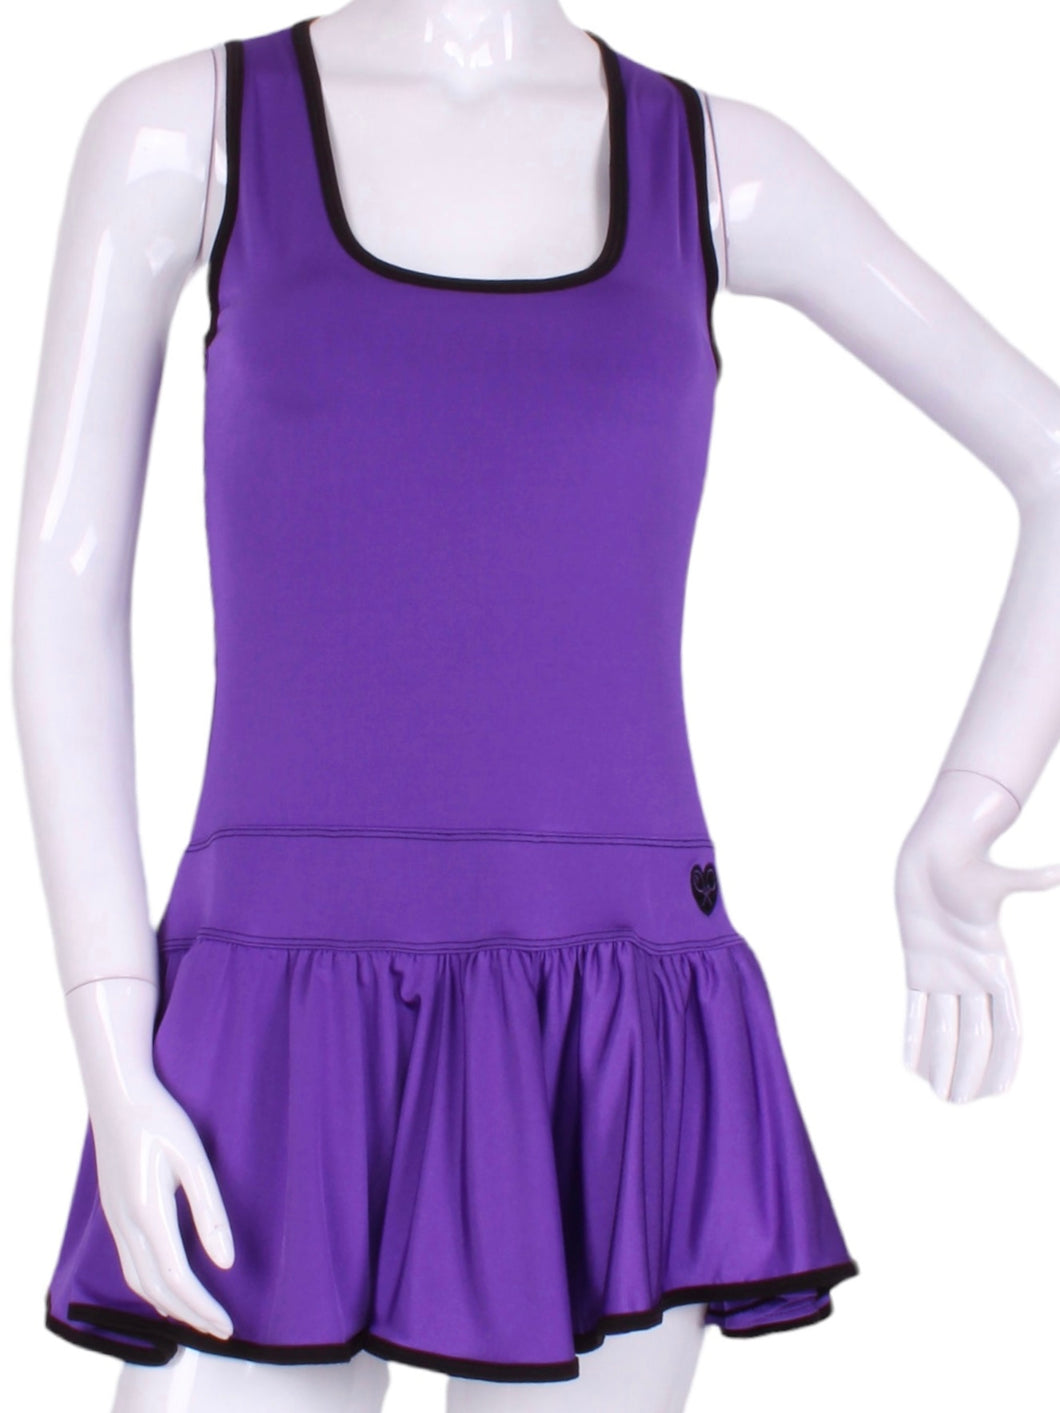 The Sandra Dee Dress offers a playful, fun, and very flirty look.  The skirt is cut like a donut and the back is racer-shaped for a sporty yet very feminine look.  This style is a very flattering deep scoop neckline.  The fabric is so so soft - and is best worn with a cross-backed bra such as our U Bra.